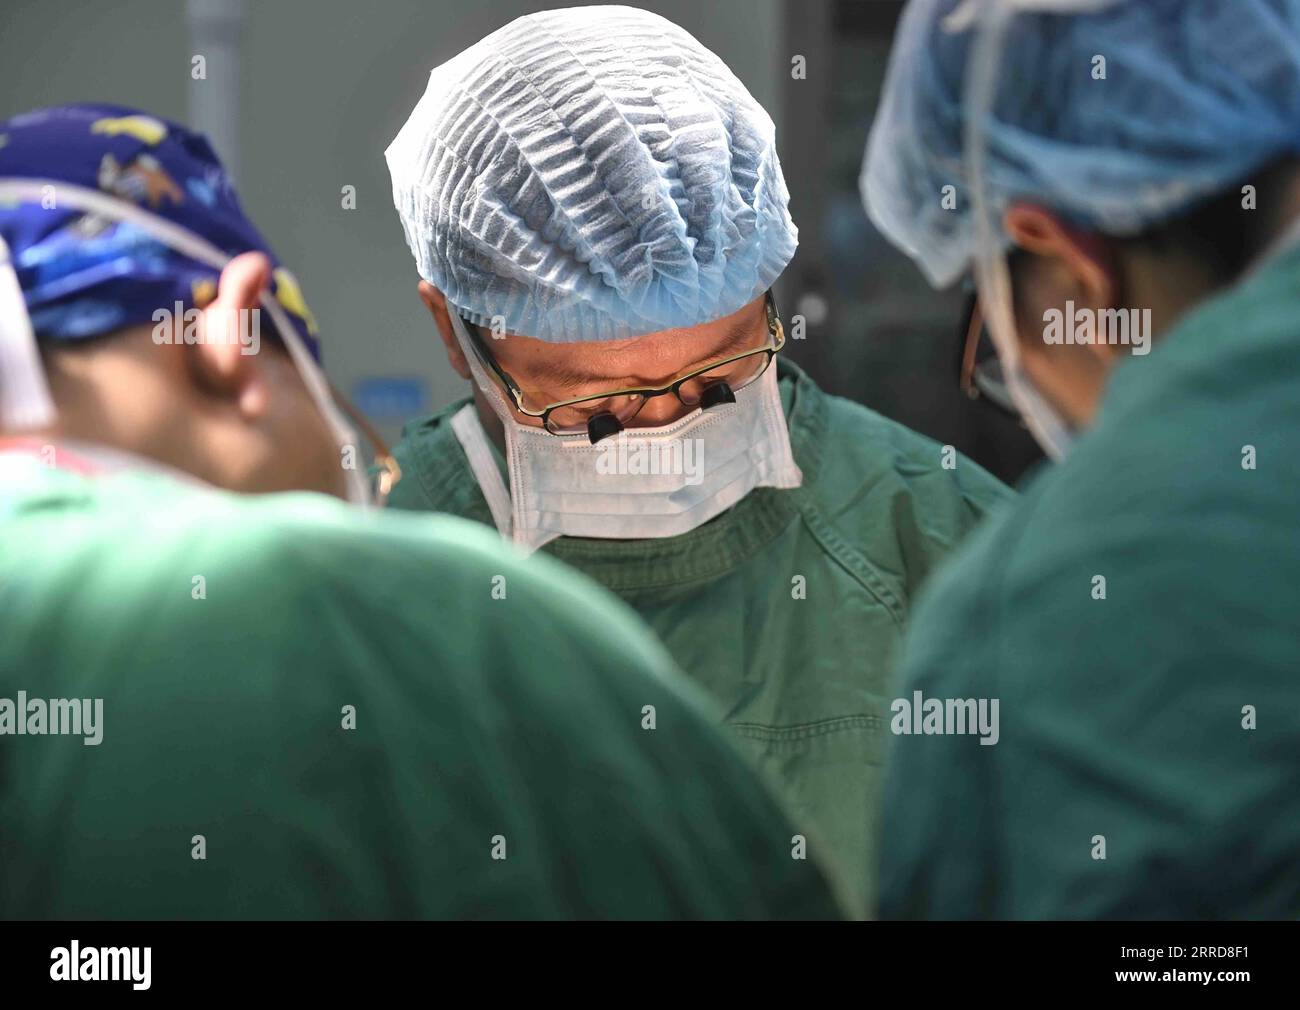 211210 -- CHENGDU, Dec. 10, 2021 -- Wang Wentao C uses the technology of extracorporeal hepatectomy plus liver autotransplantation in the treatment of a late-stage hydatid disease patient at a hospital in Tibetan Autonomous Prefecture of Garze, southwest China s Sichuan Province, Jan. 16, 2020. Wang Wentao, deputy director of the liver surgery department at West China Hospital of Sichuan University, started his work on the prevention and control of hydatid disease in Tibetan Autonomous Prefecture of Garze in 2006 when he learned that some local people suffer from hydatid disease during one of Stock Photo